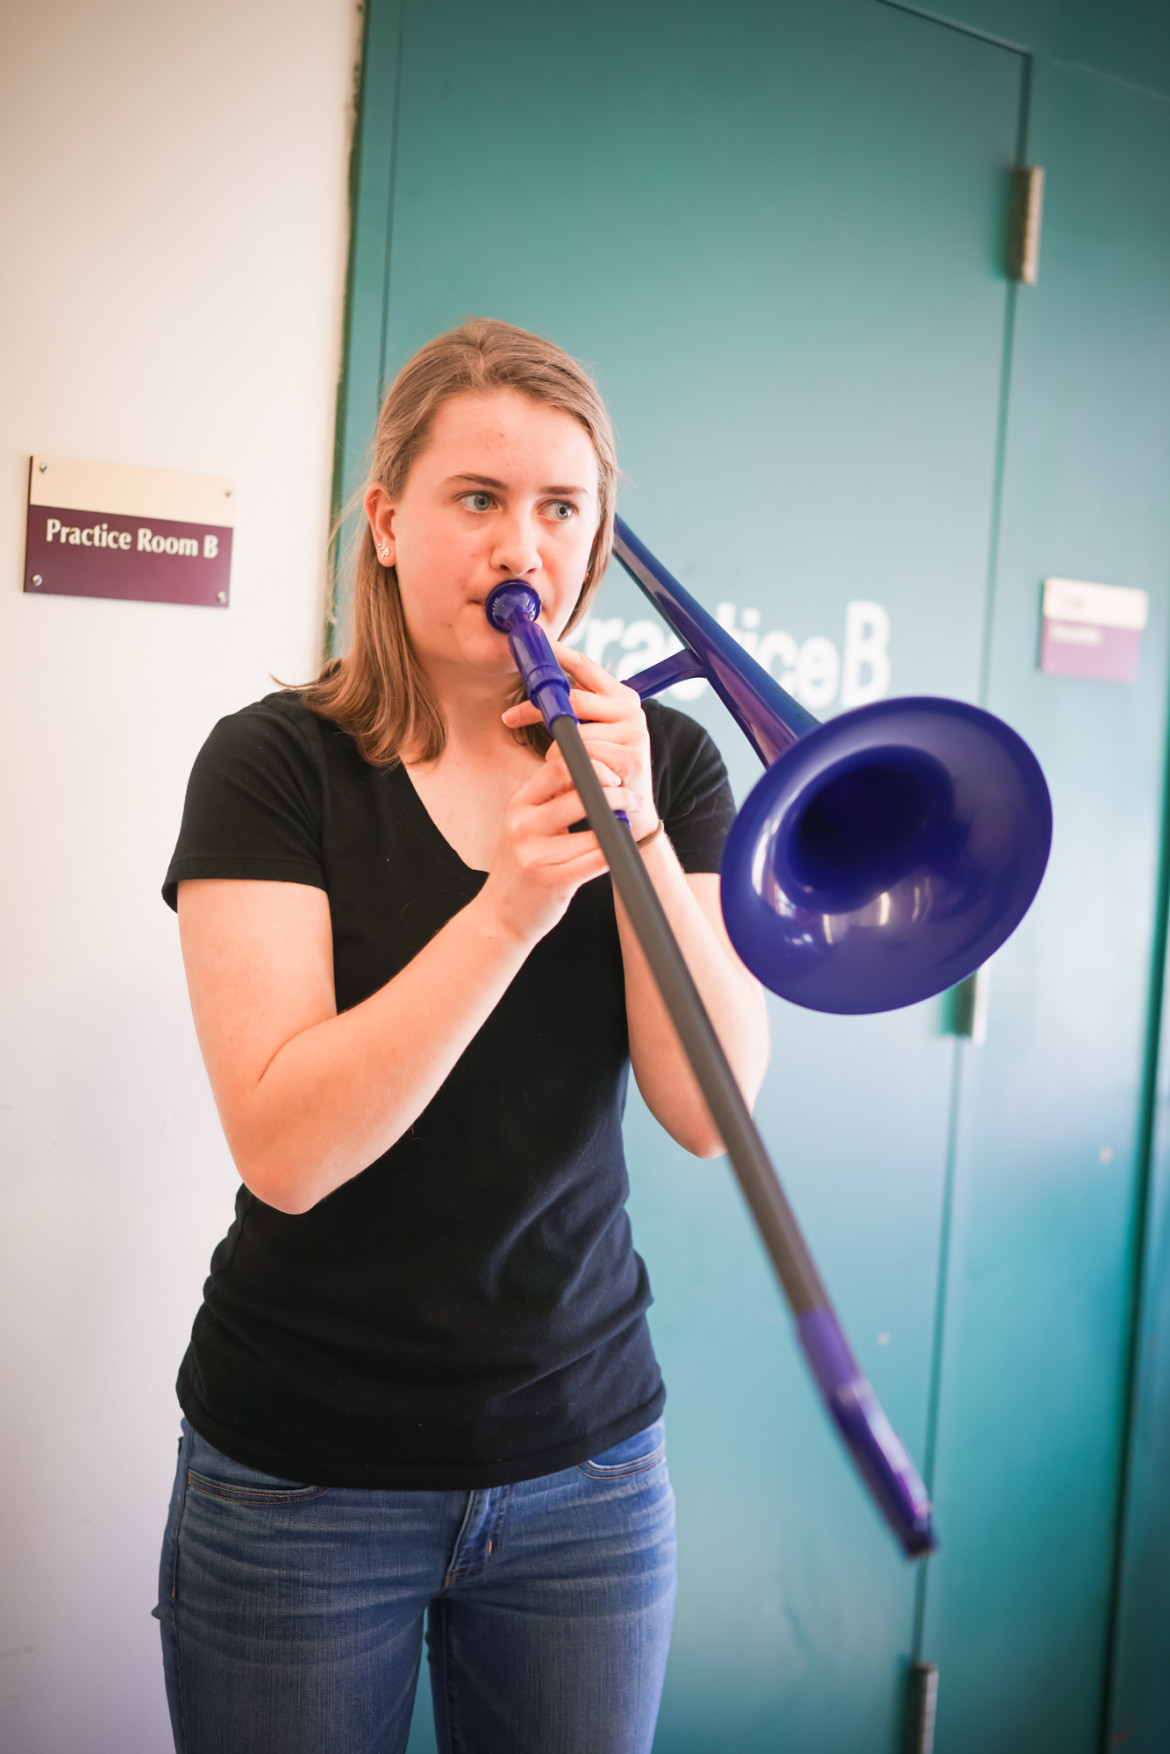 Watertown High School student Catherine Holt plays a pBone – a plastic trombone – which was donated to the district by Ernie Boch Jr.'s charity, Music Drives Us.